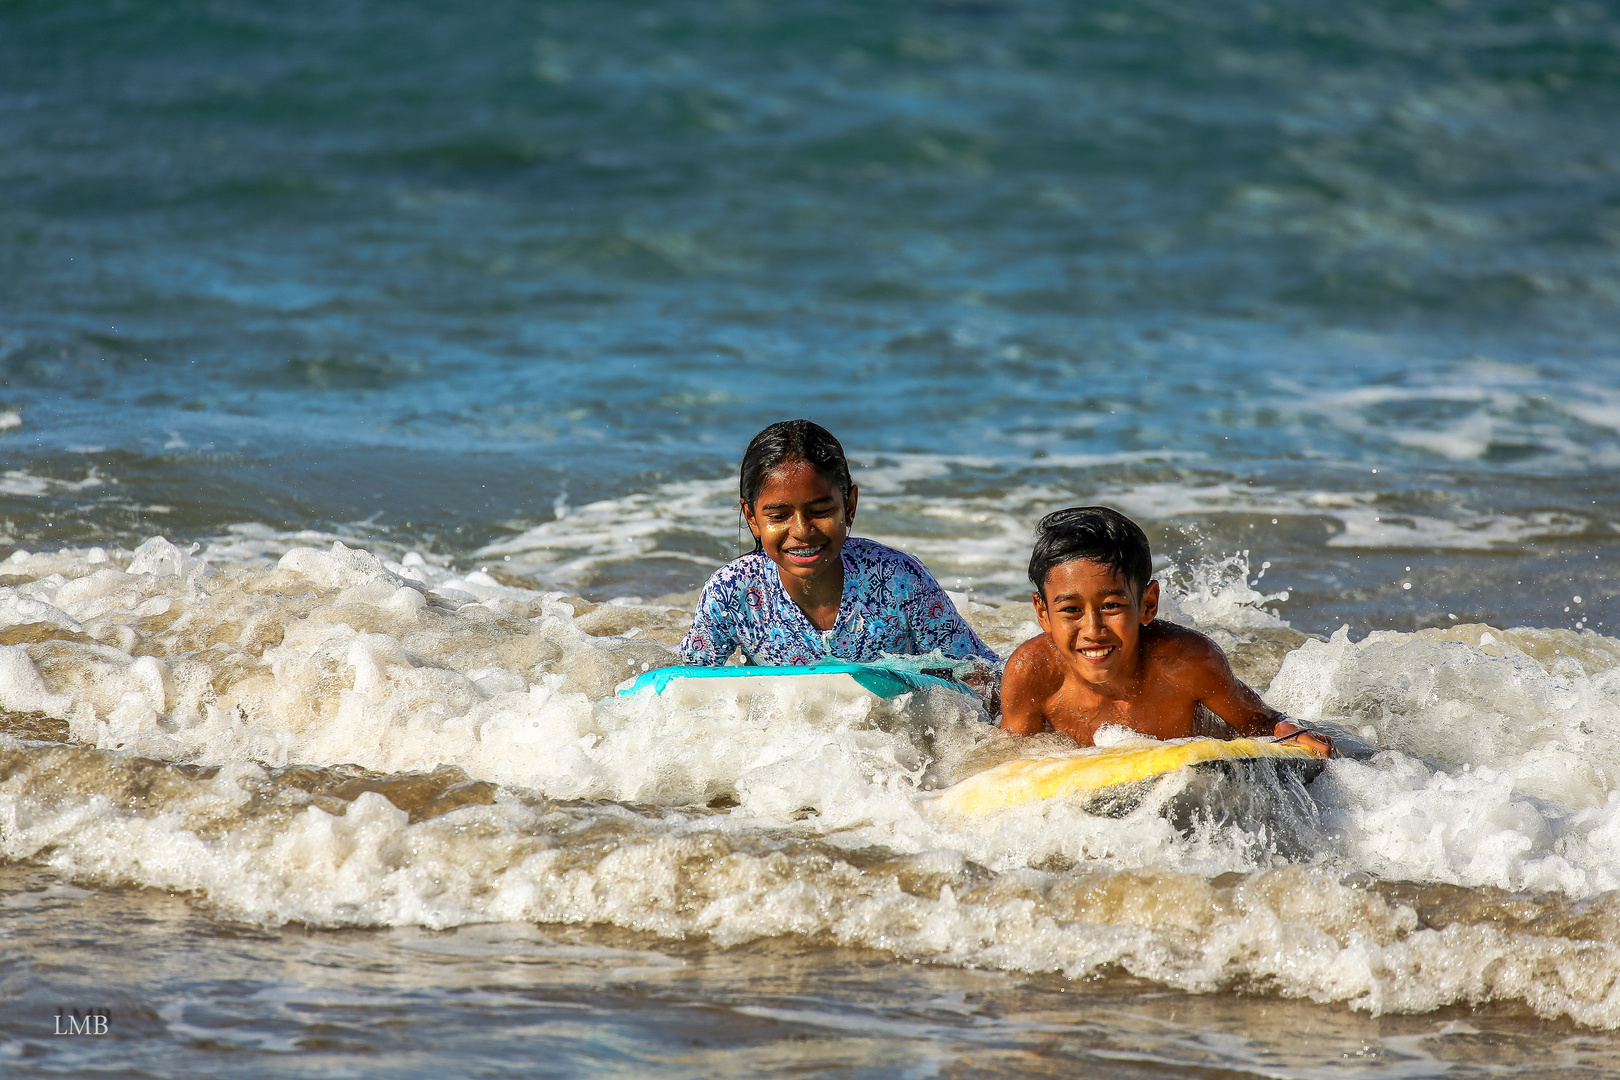 Children happiness in the waves